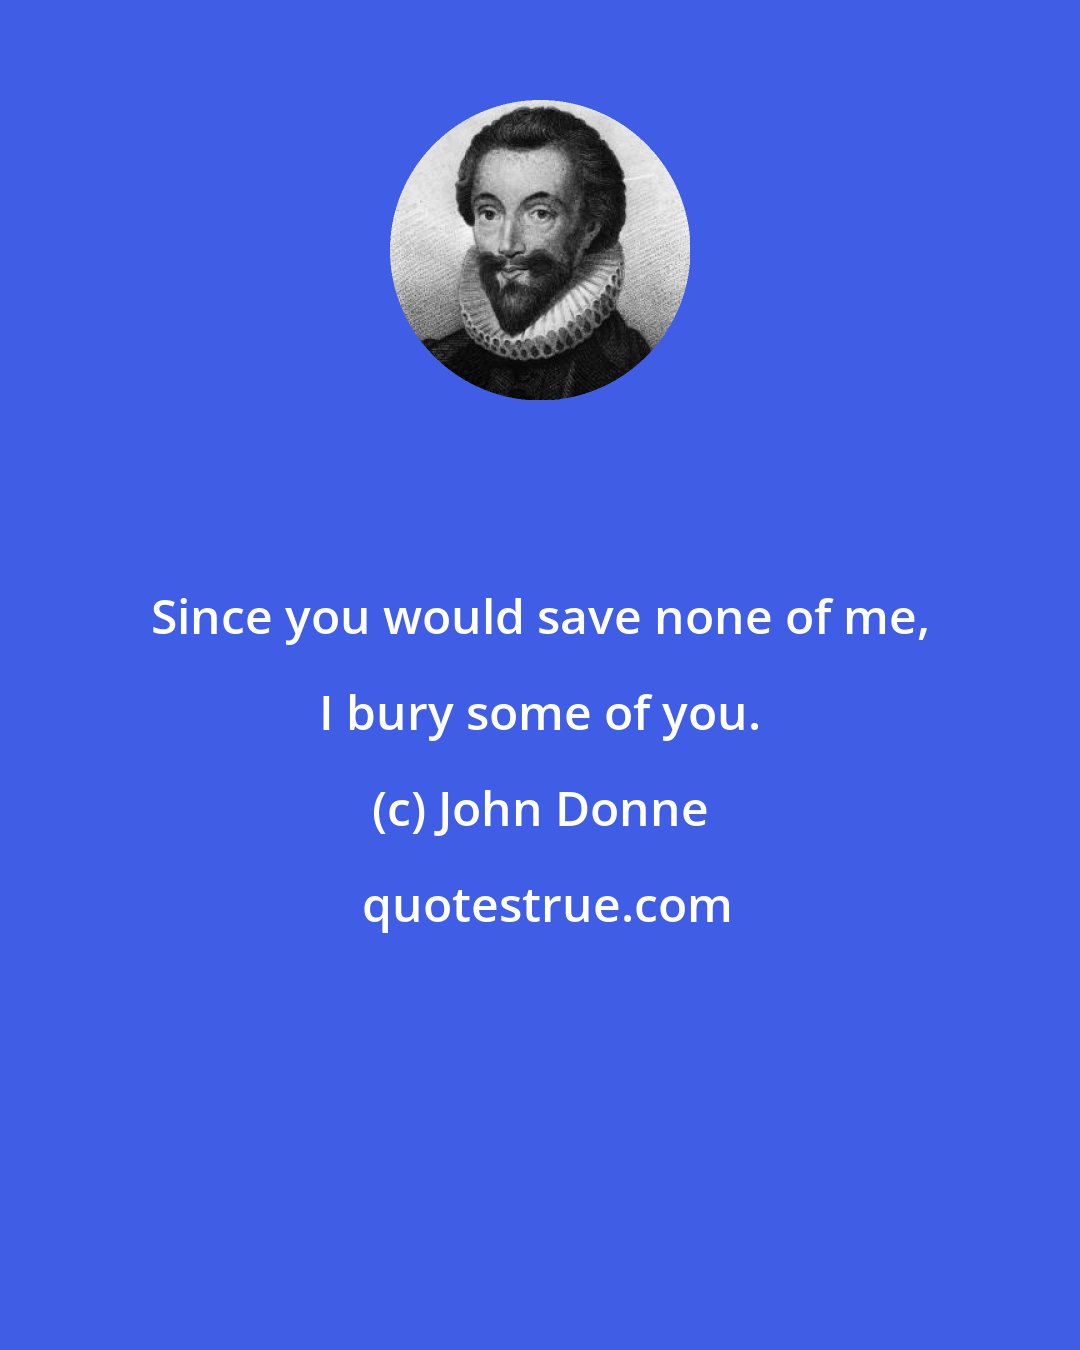 John Donne: Since you would save none of me, I bury some of you.